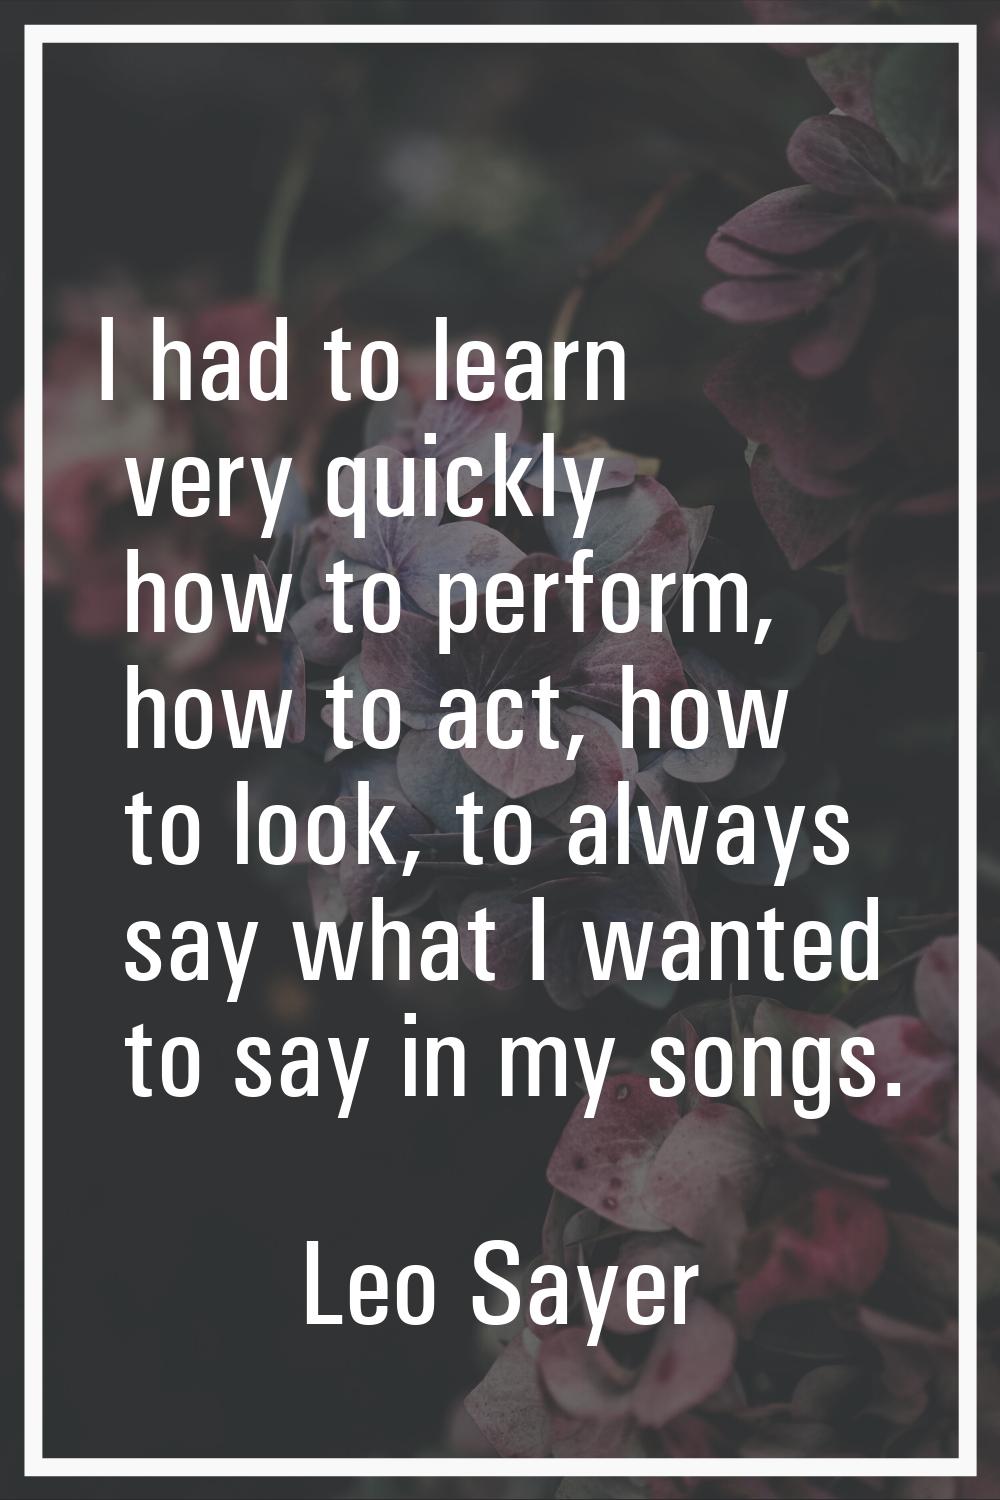 I had to learn very quickly how to perform, how to act, how to look, to always say what I wanted to